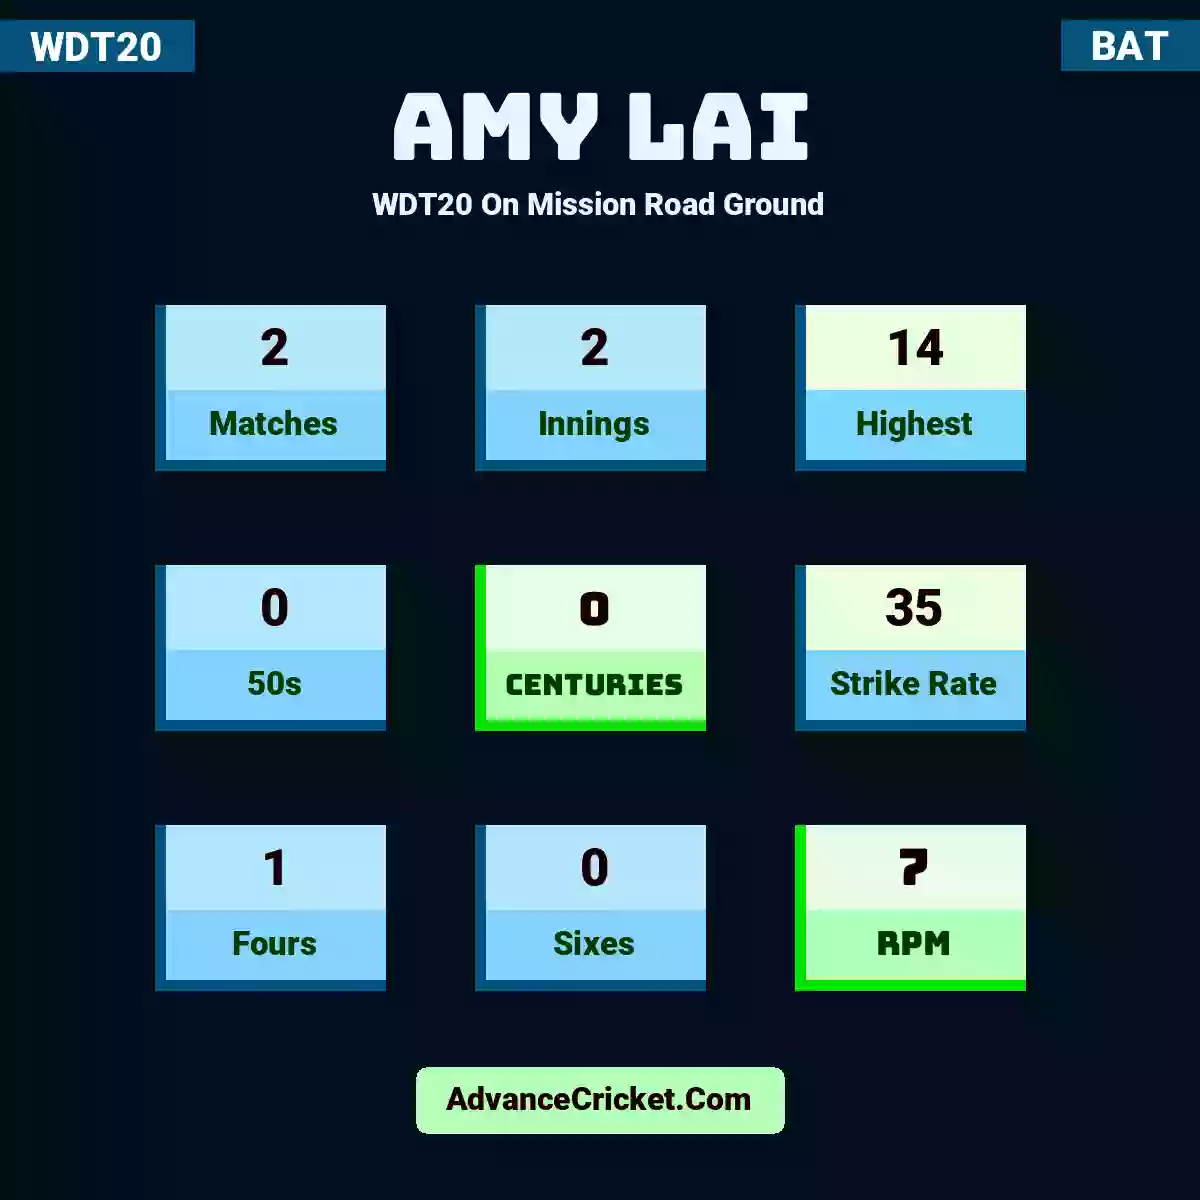 Amy Lai WDT20  On Mission Road Ground, Amy Lai played 2 matches, scored 14 runs as highest, 0 half-centuries, and 0 centuries, with a strike rate of 35. A.Lai hit 1 fours and 0 sixes, with an RPM of 7.